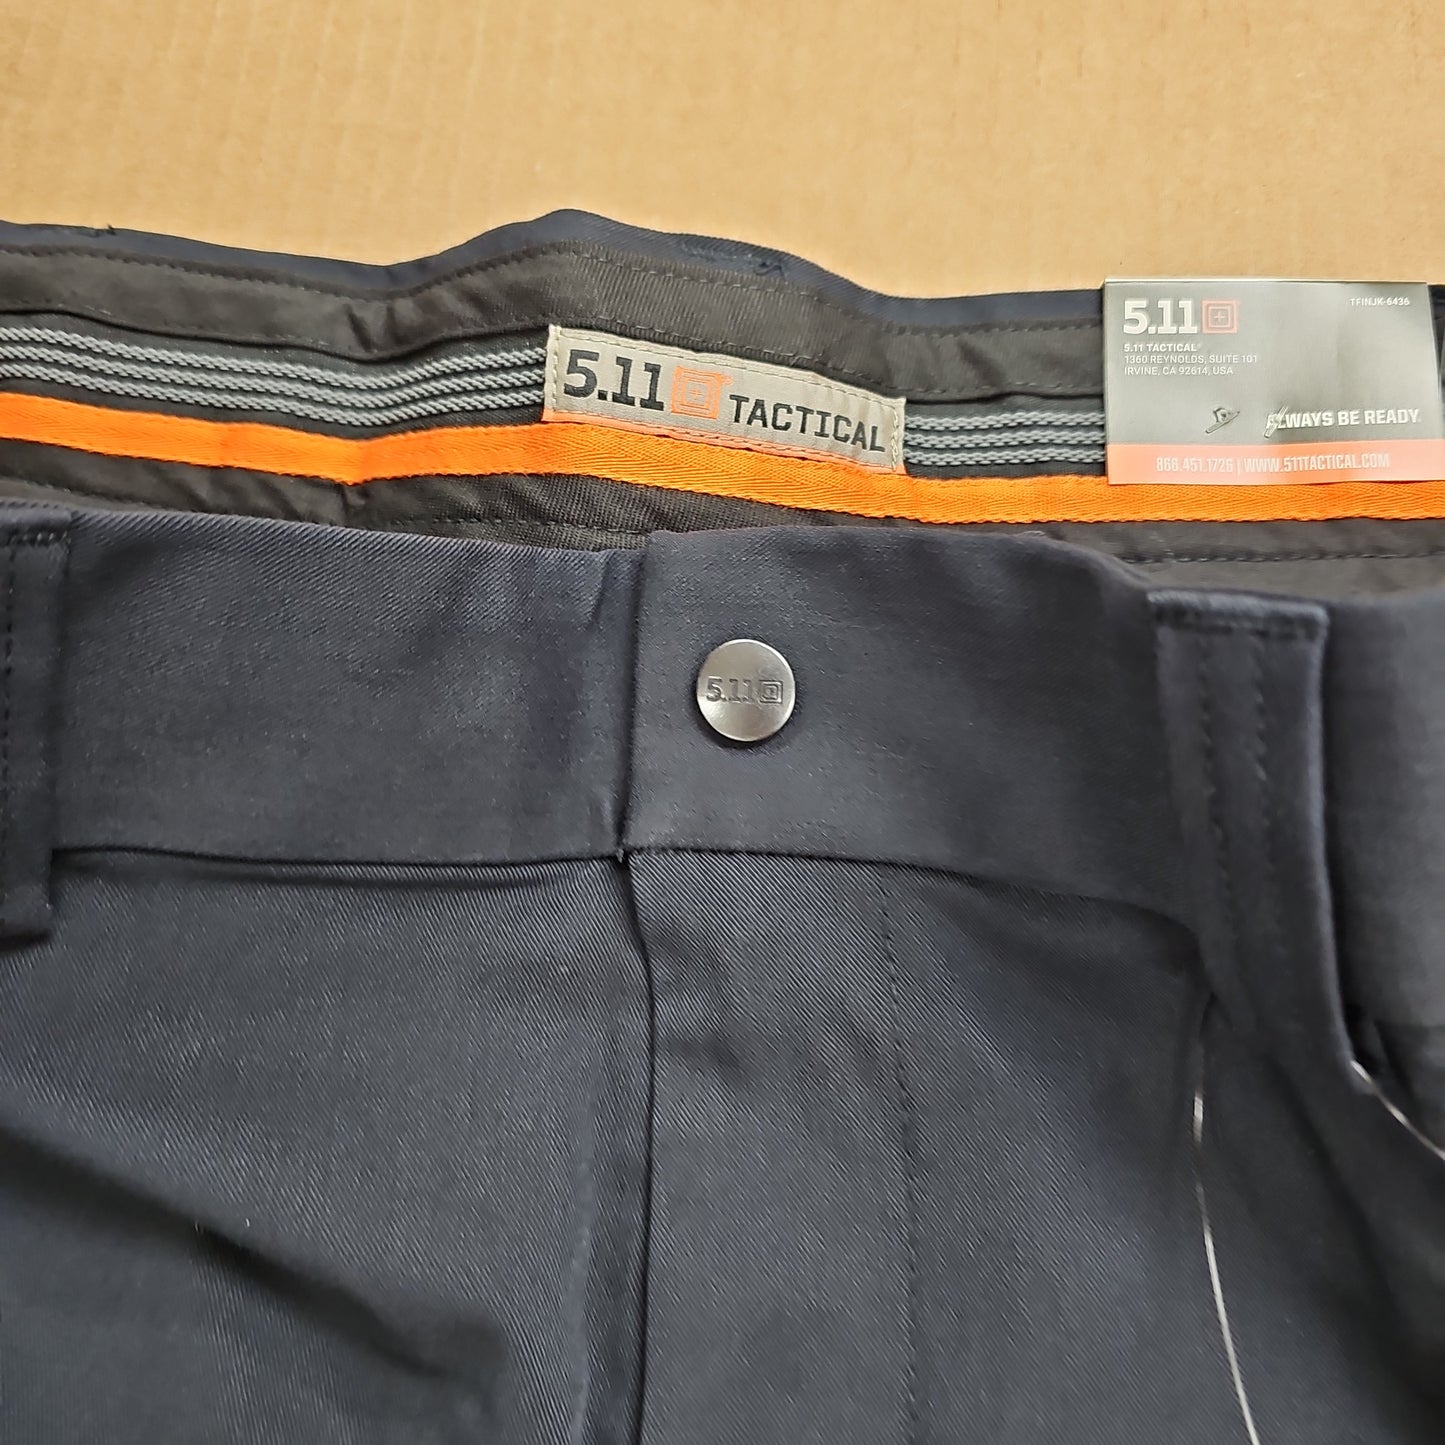 5.11 Tactical Pant: Twill, FT PW, CL-A Mid. Navy, 40 74492-750-40